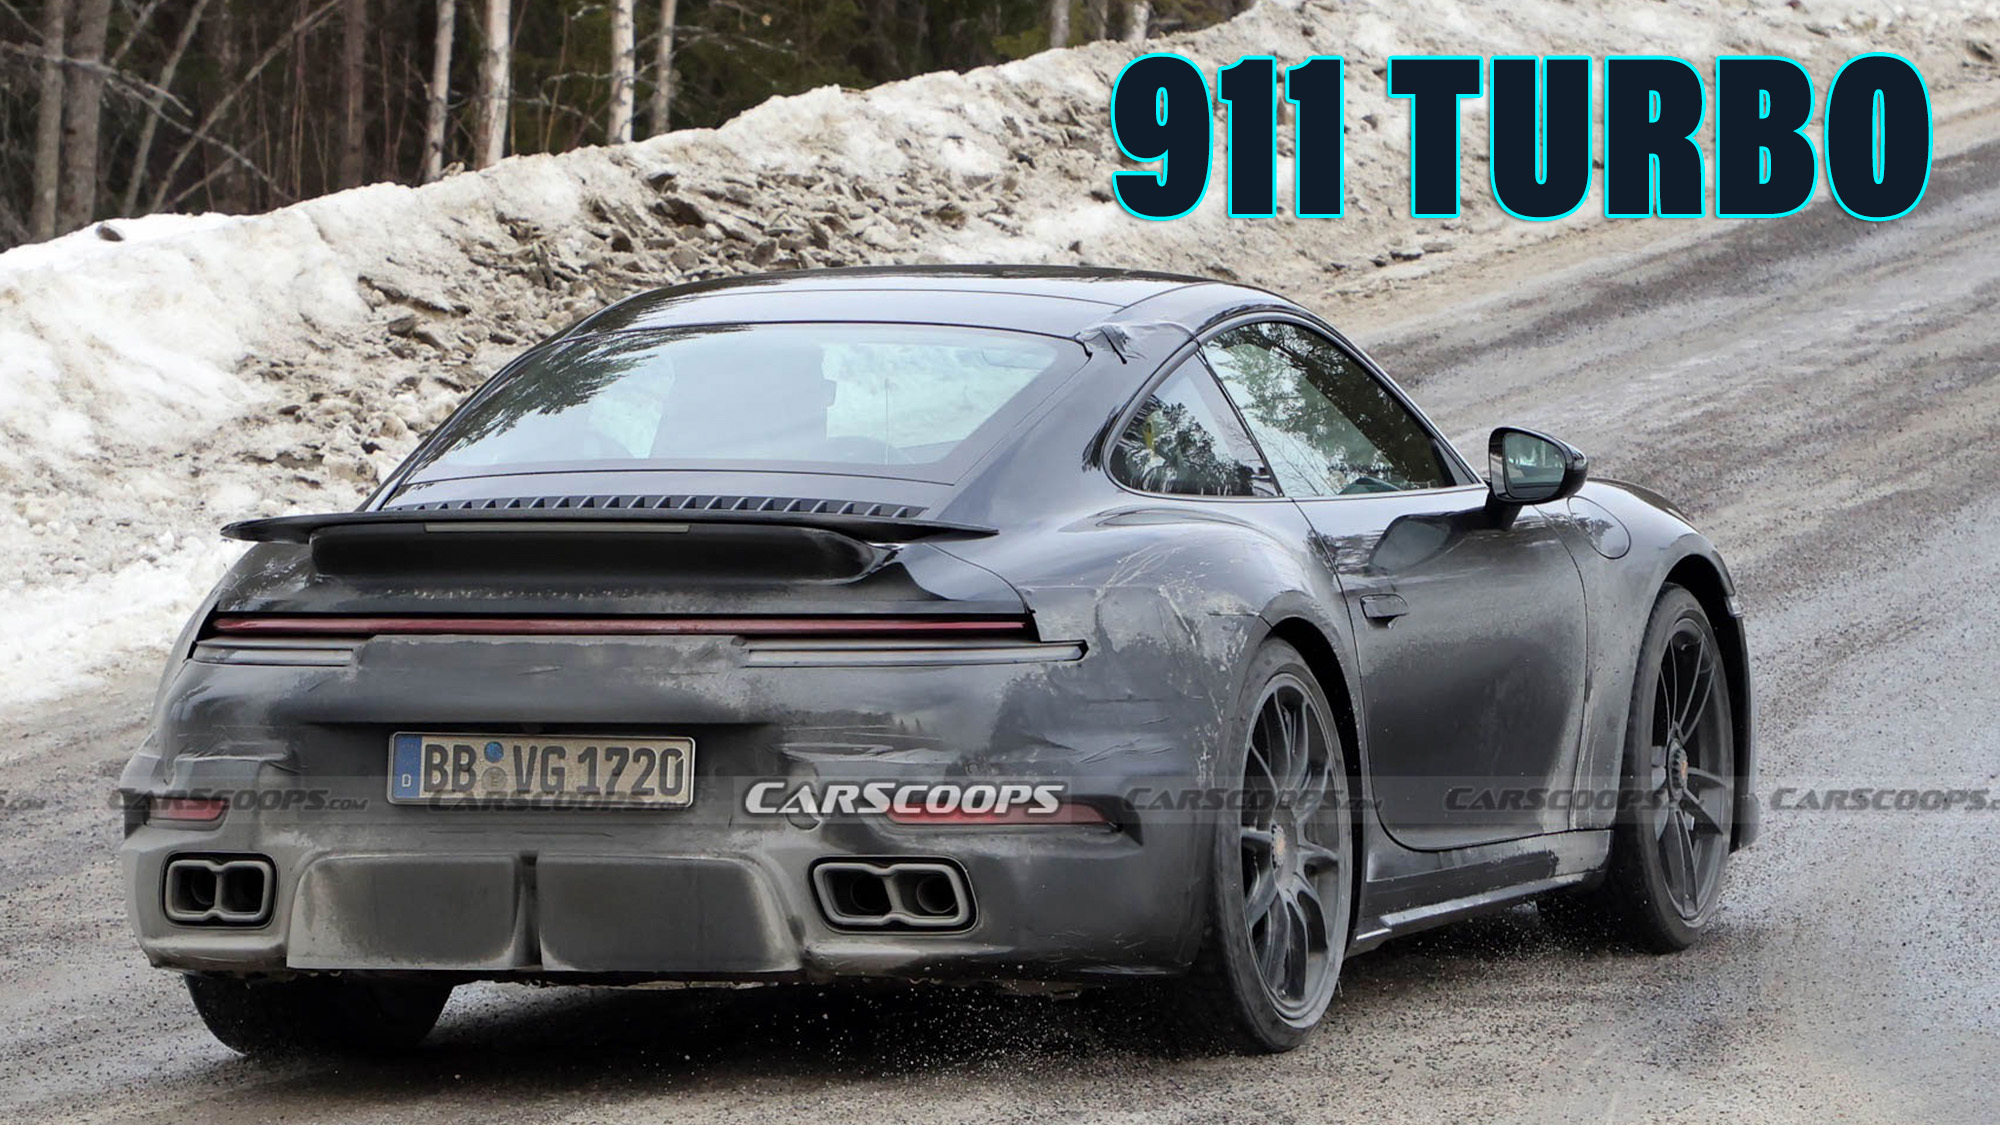 Facelifted Porsche 911 Turbo Shows Us A Dirty Pair Of New-Look Heels |  Carscoops